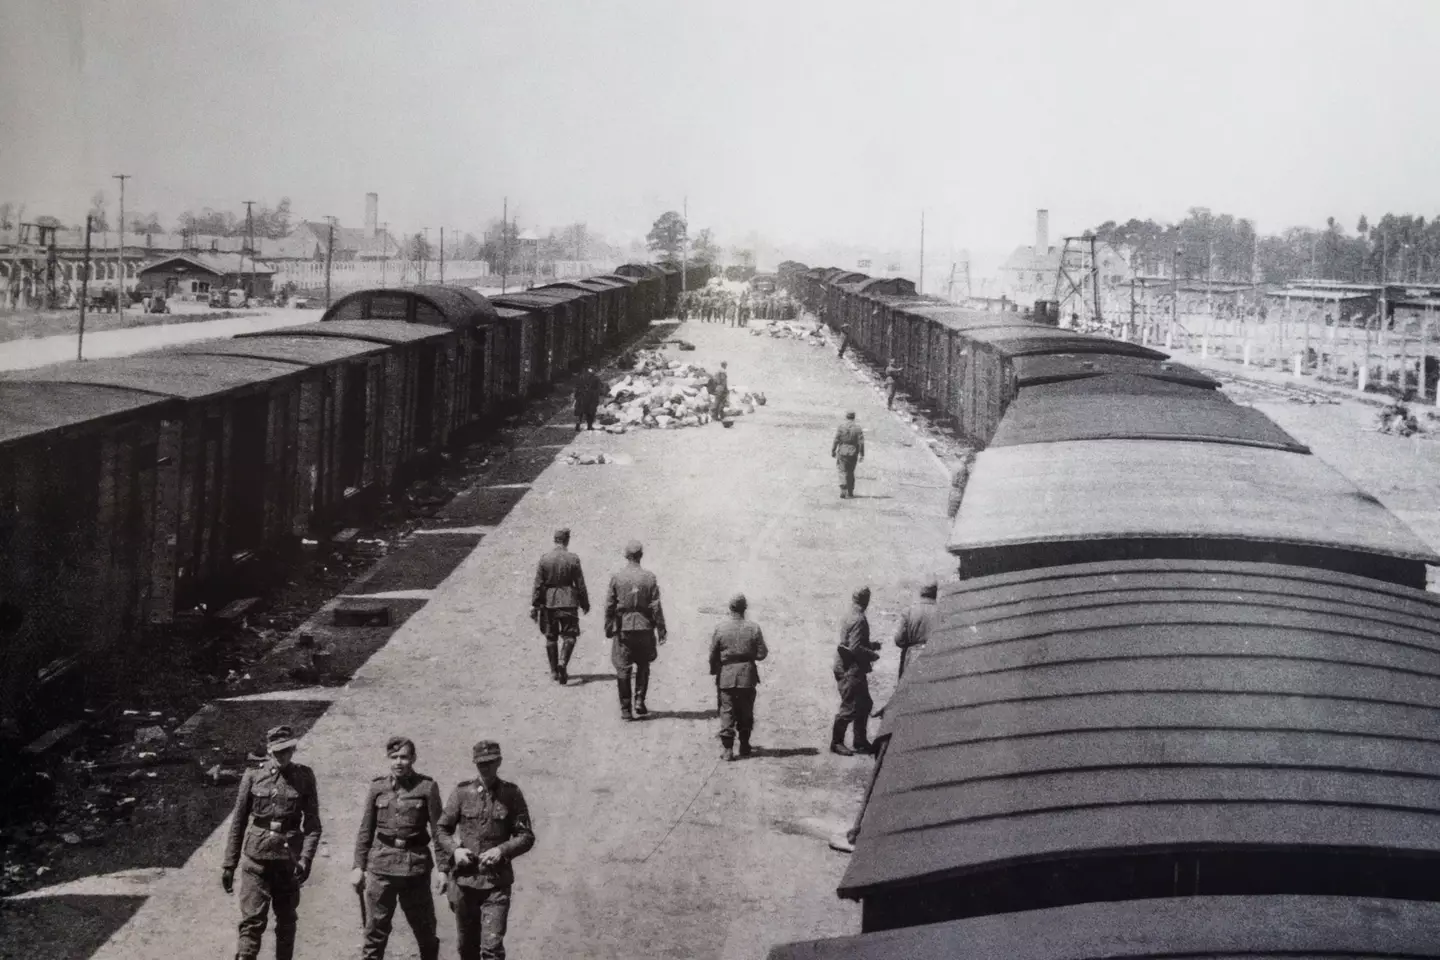 Nazi guards at the Auschwitz-Birkenau concentration camp in 1944.